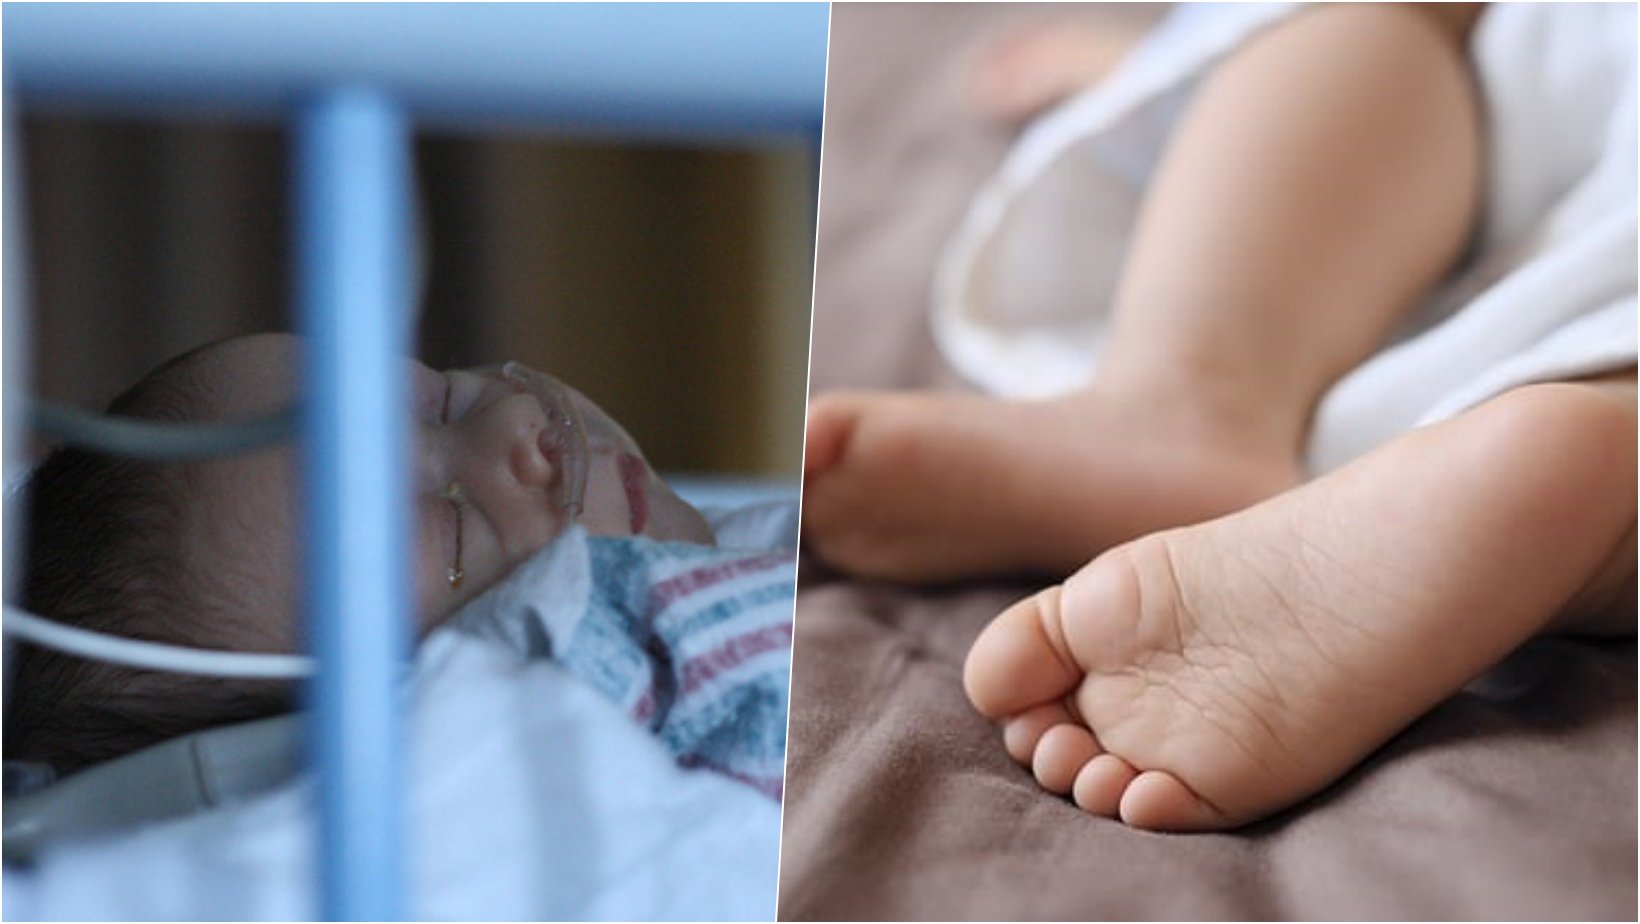 6 facebook cover 1.jpg?resize=1200,630 - 18-Days-Old Baby Girl Killed After Her Father Accidentally Suffocated Her With His Arm While They Slept